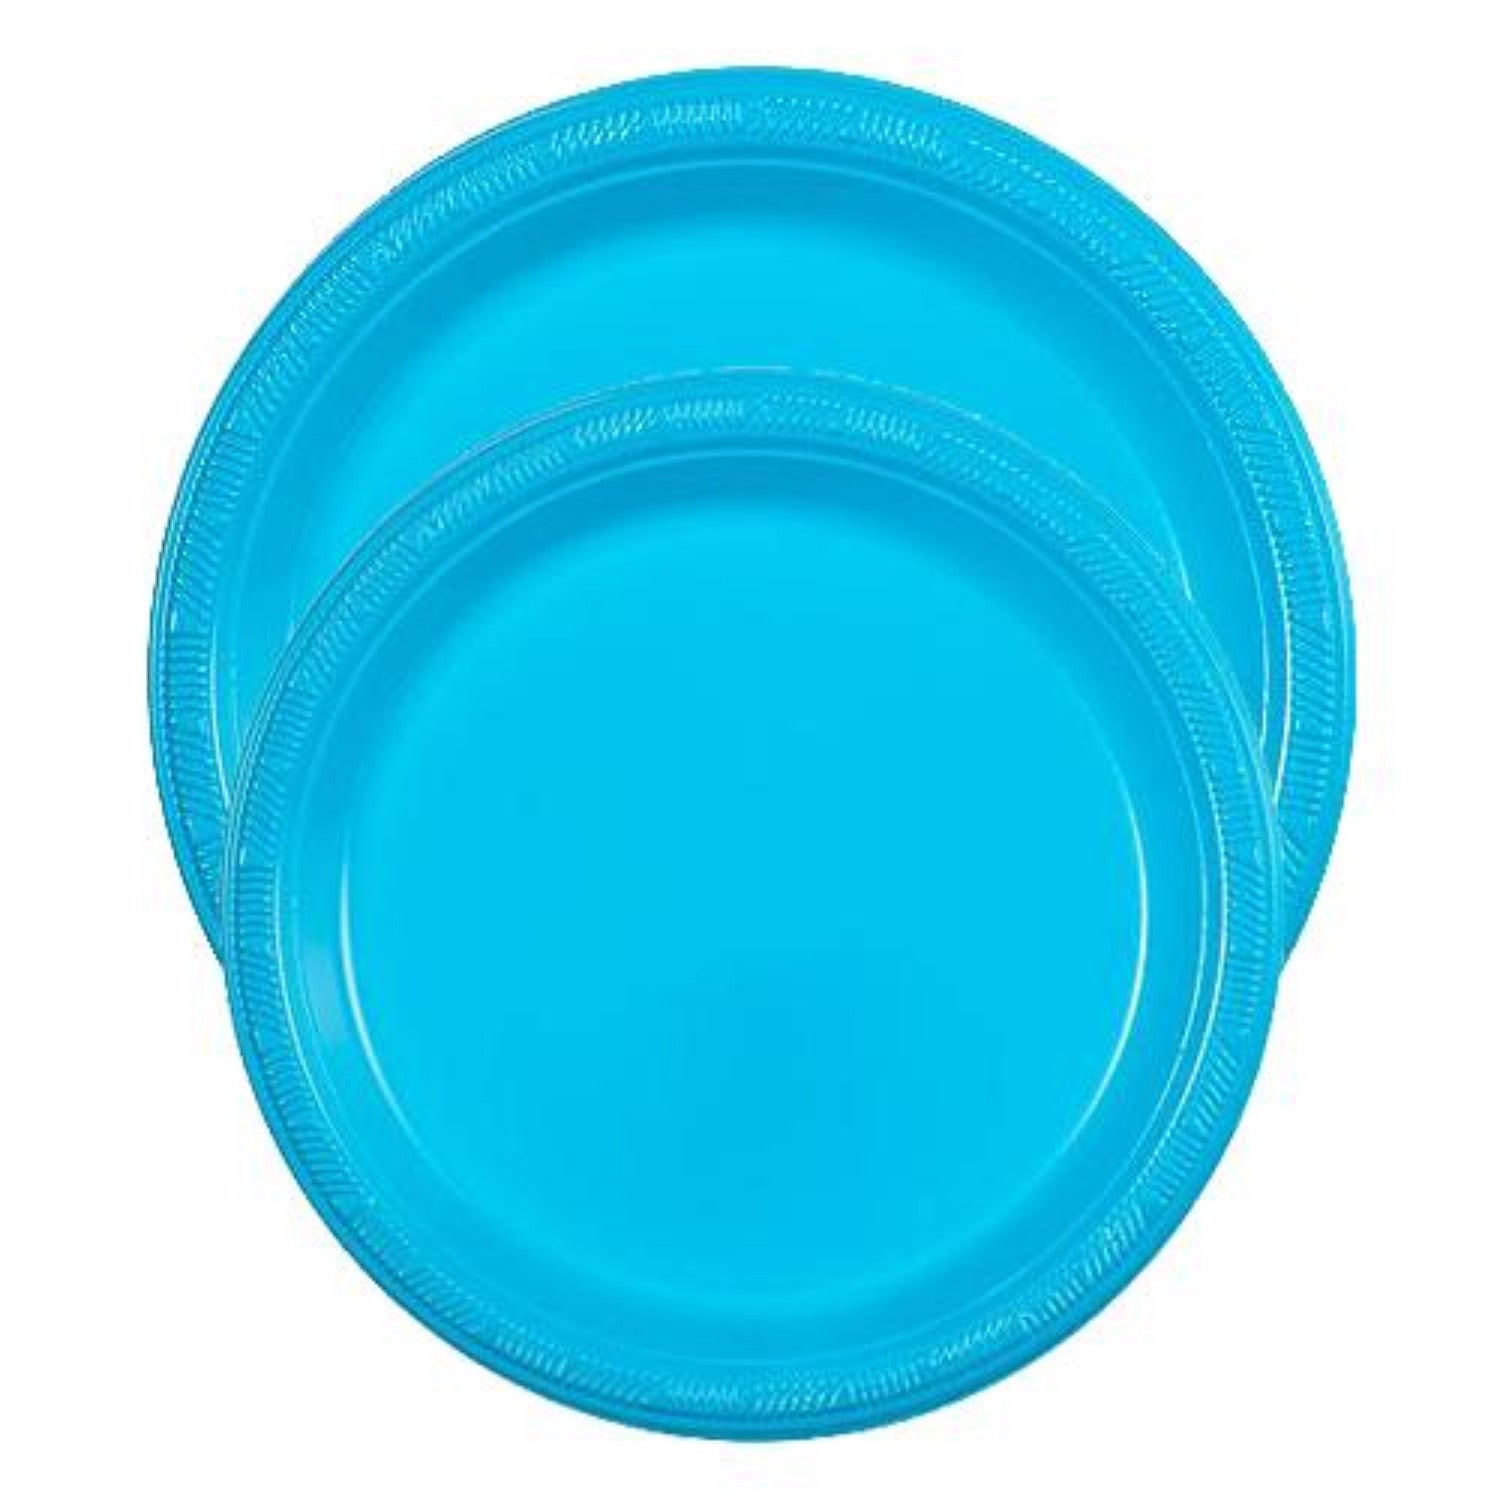 SALE Island Blue Round Plastic Plate 7" 15 count  Party Dimensions   